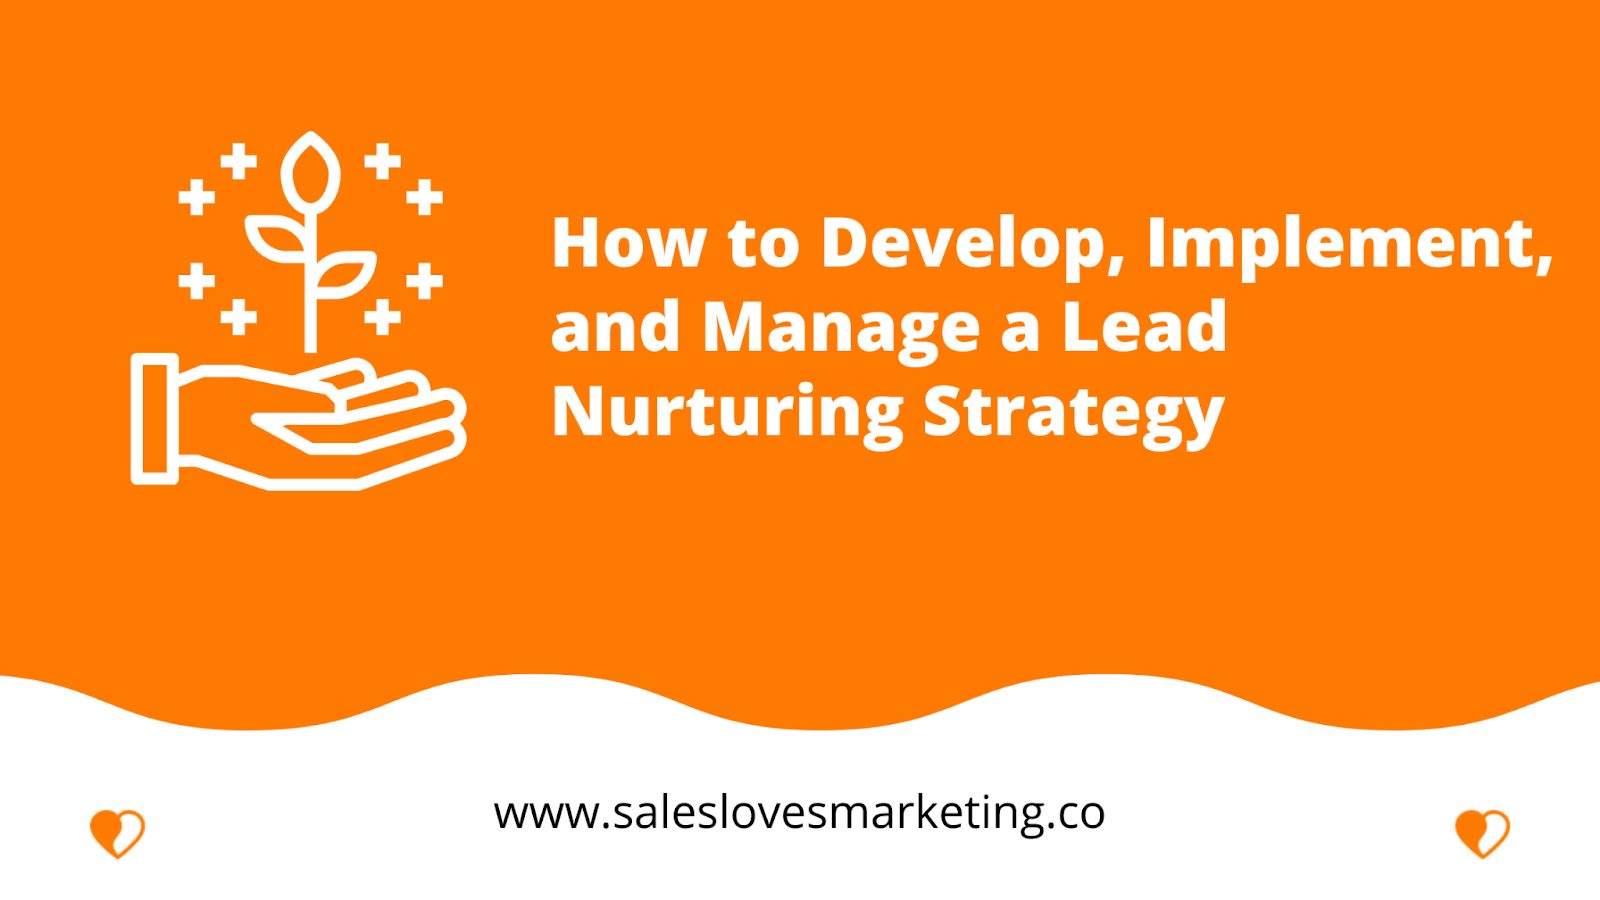 How to Develop, Implement, and Manage a Lead Nurturing Strategy